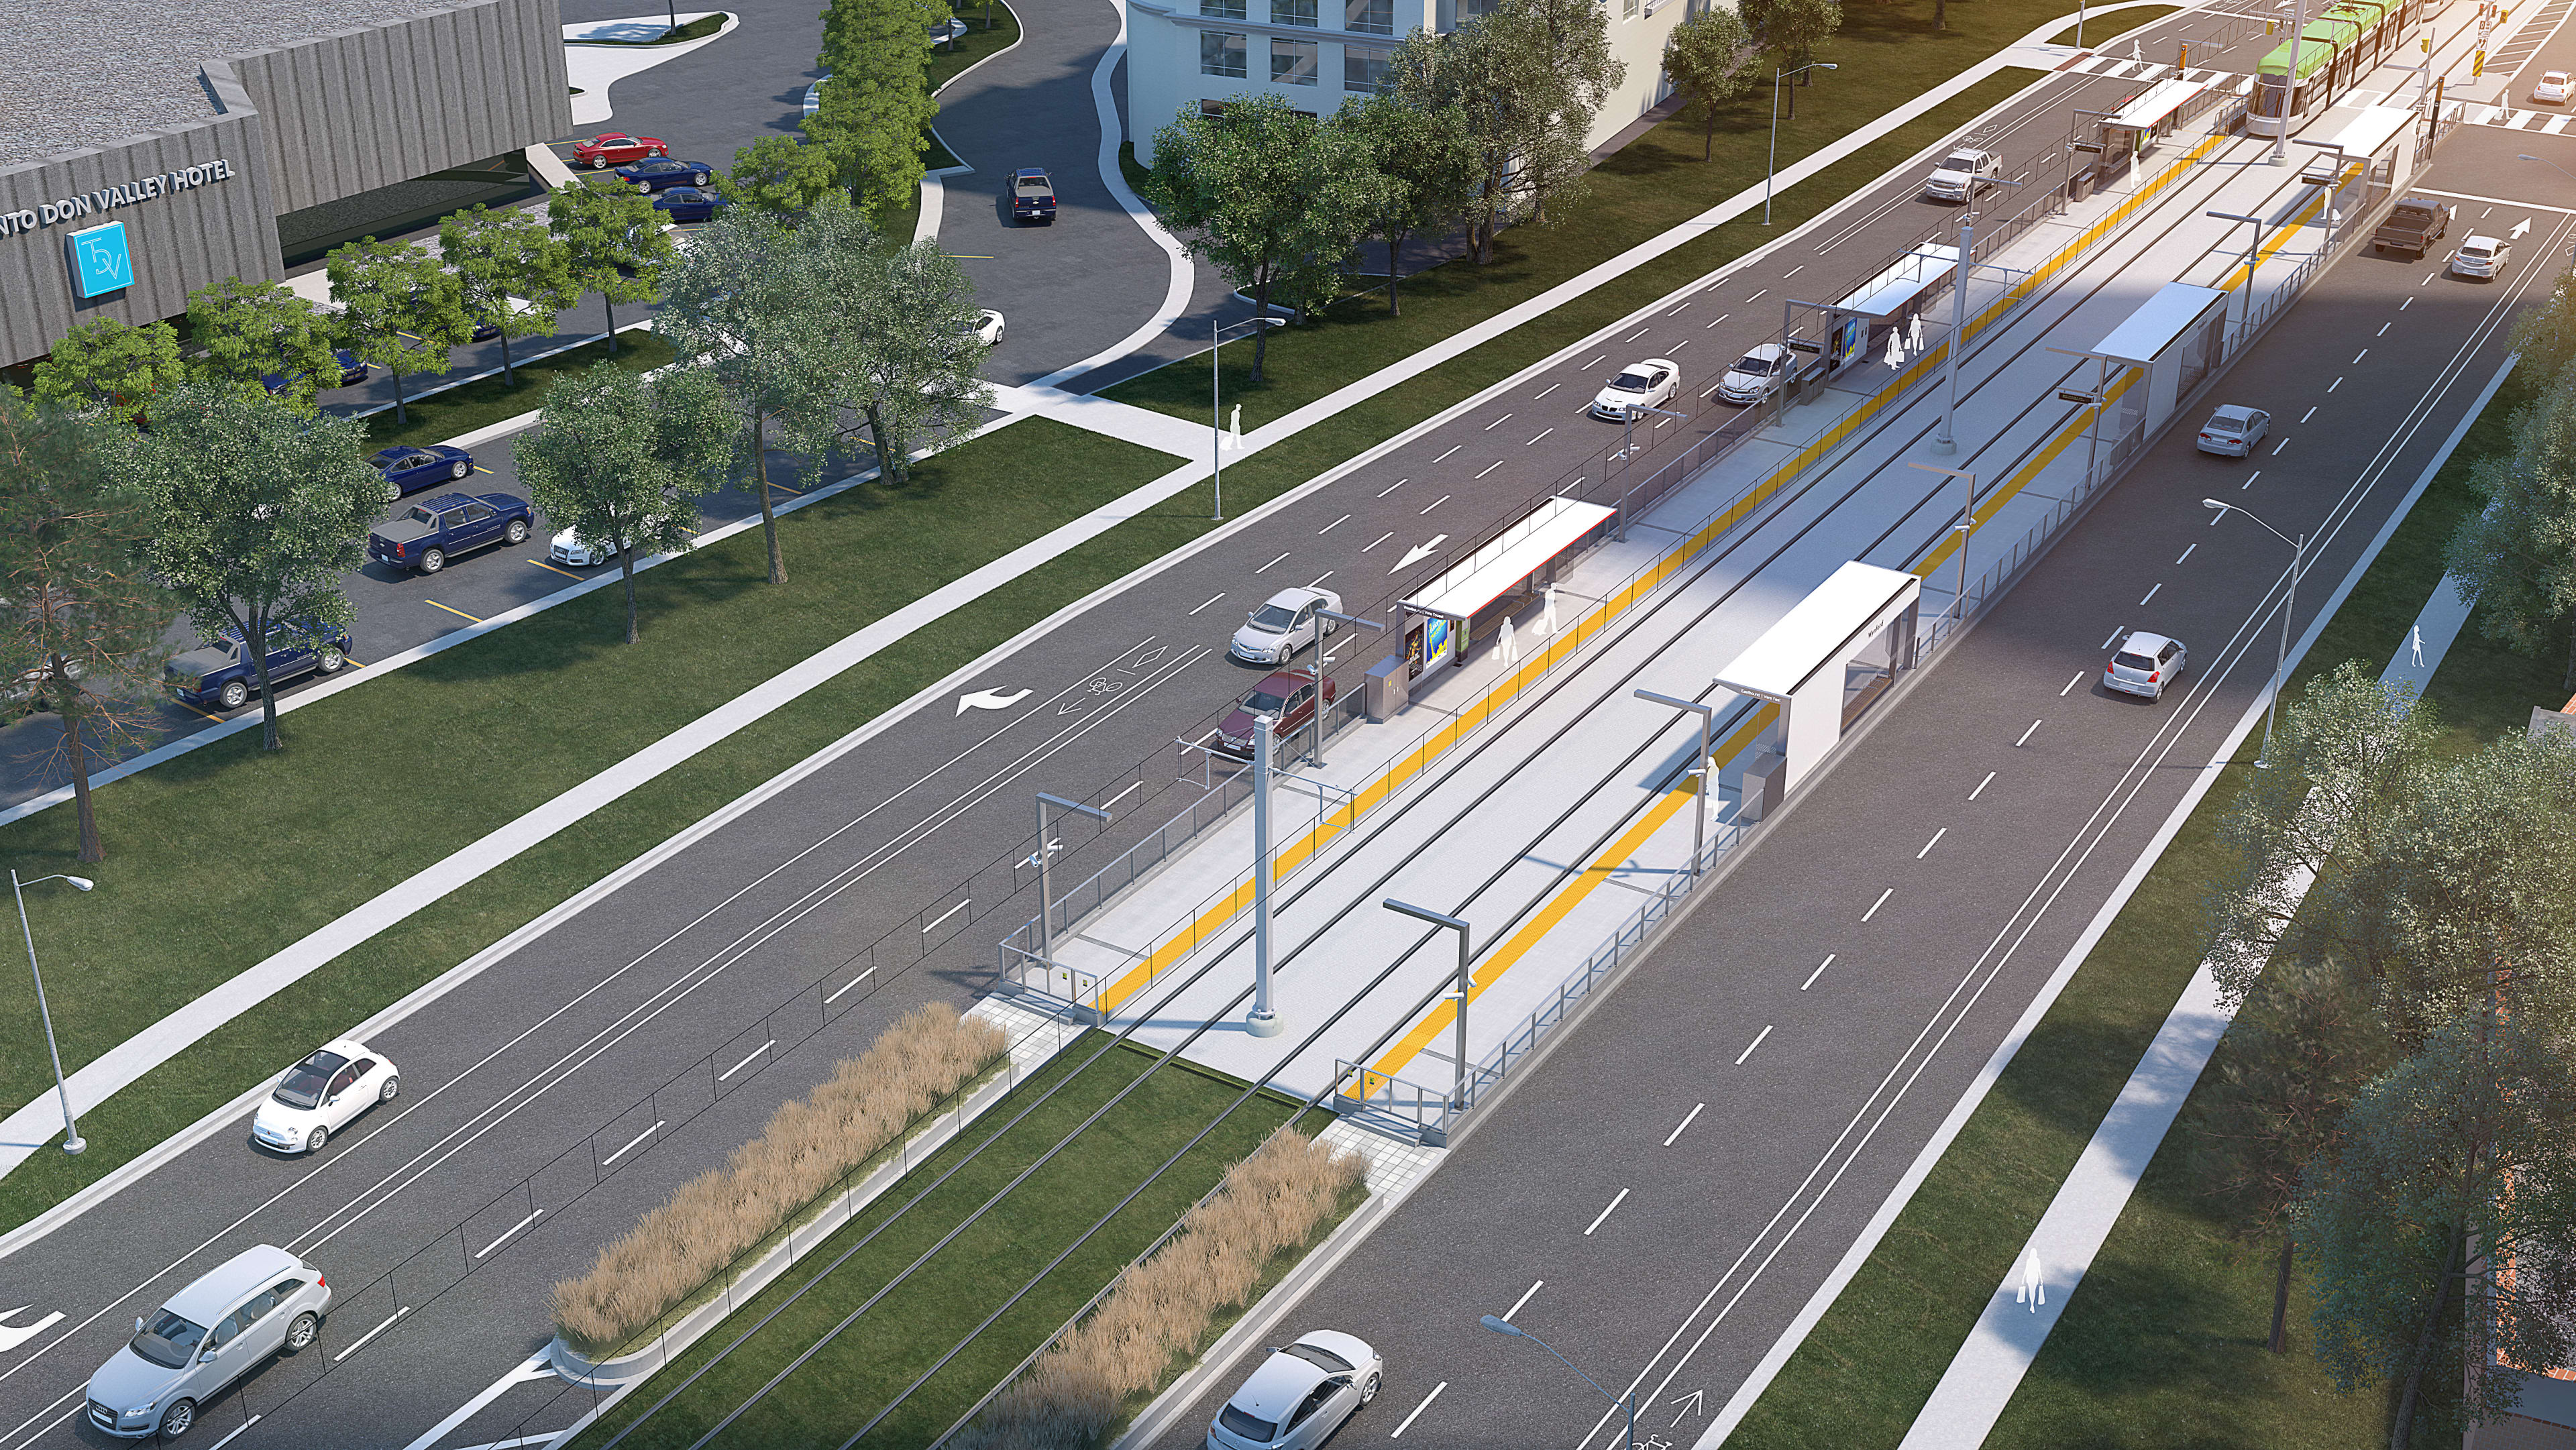 An artist concept shows a stop between active roads, with a light rail vehicle pulling up.